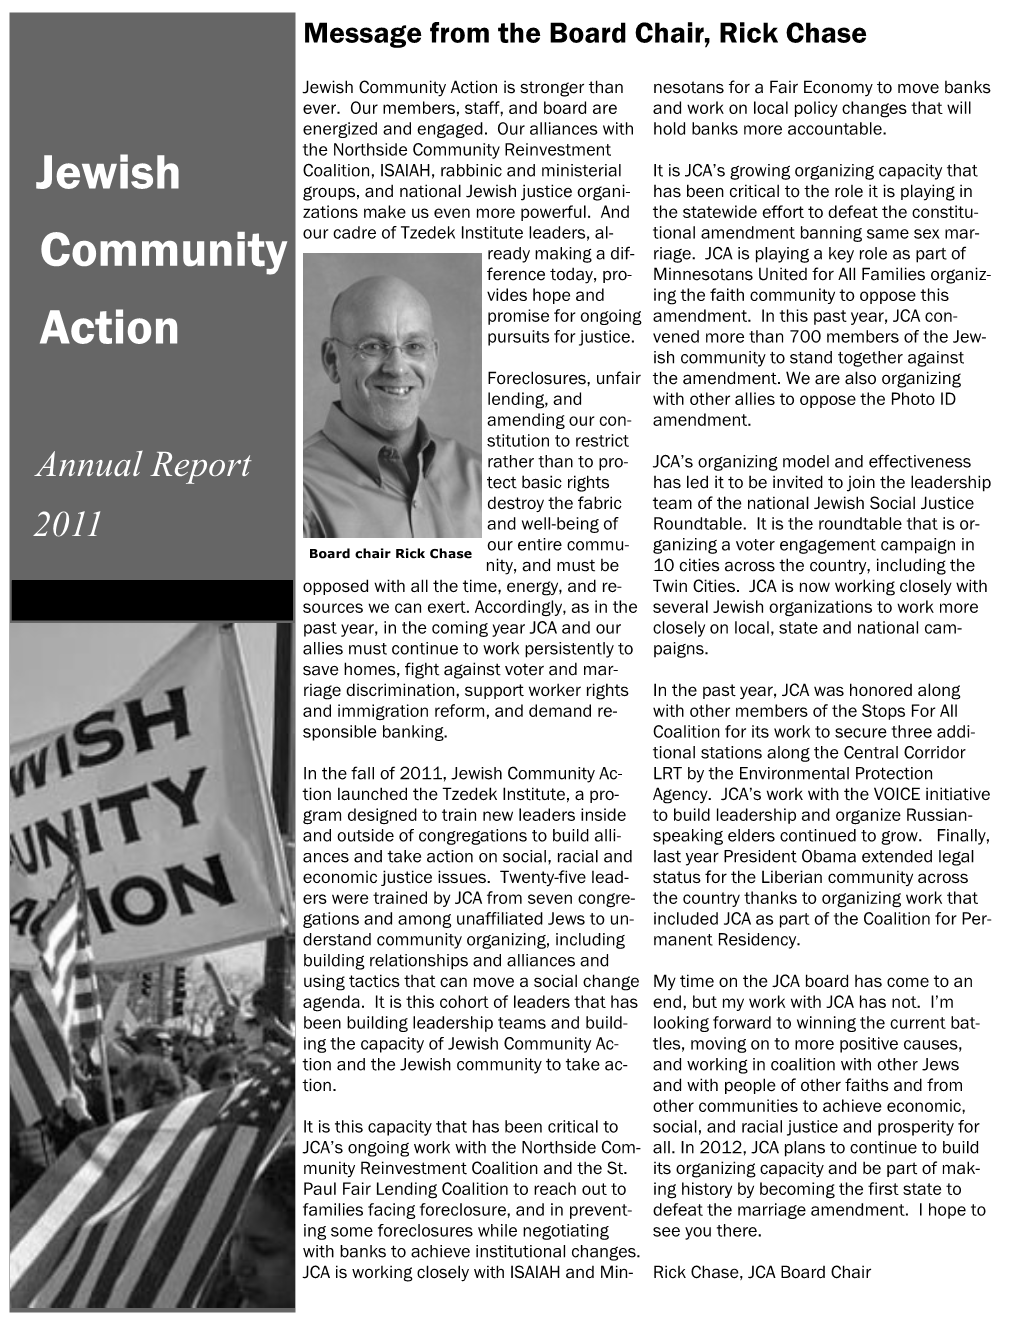 Jewish Community Action Is Stronger Than Nesotans for a Fair Economy to Move Banks Ever